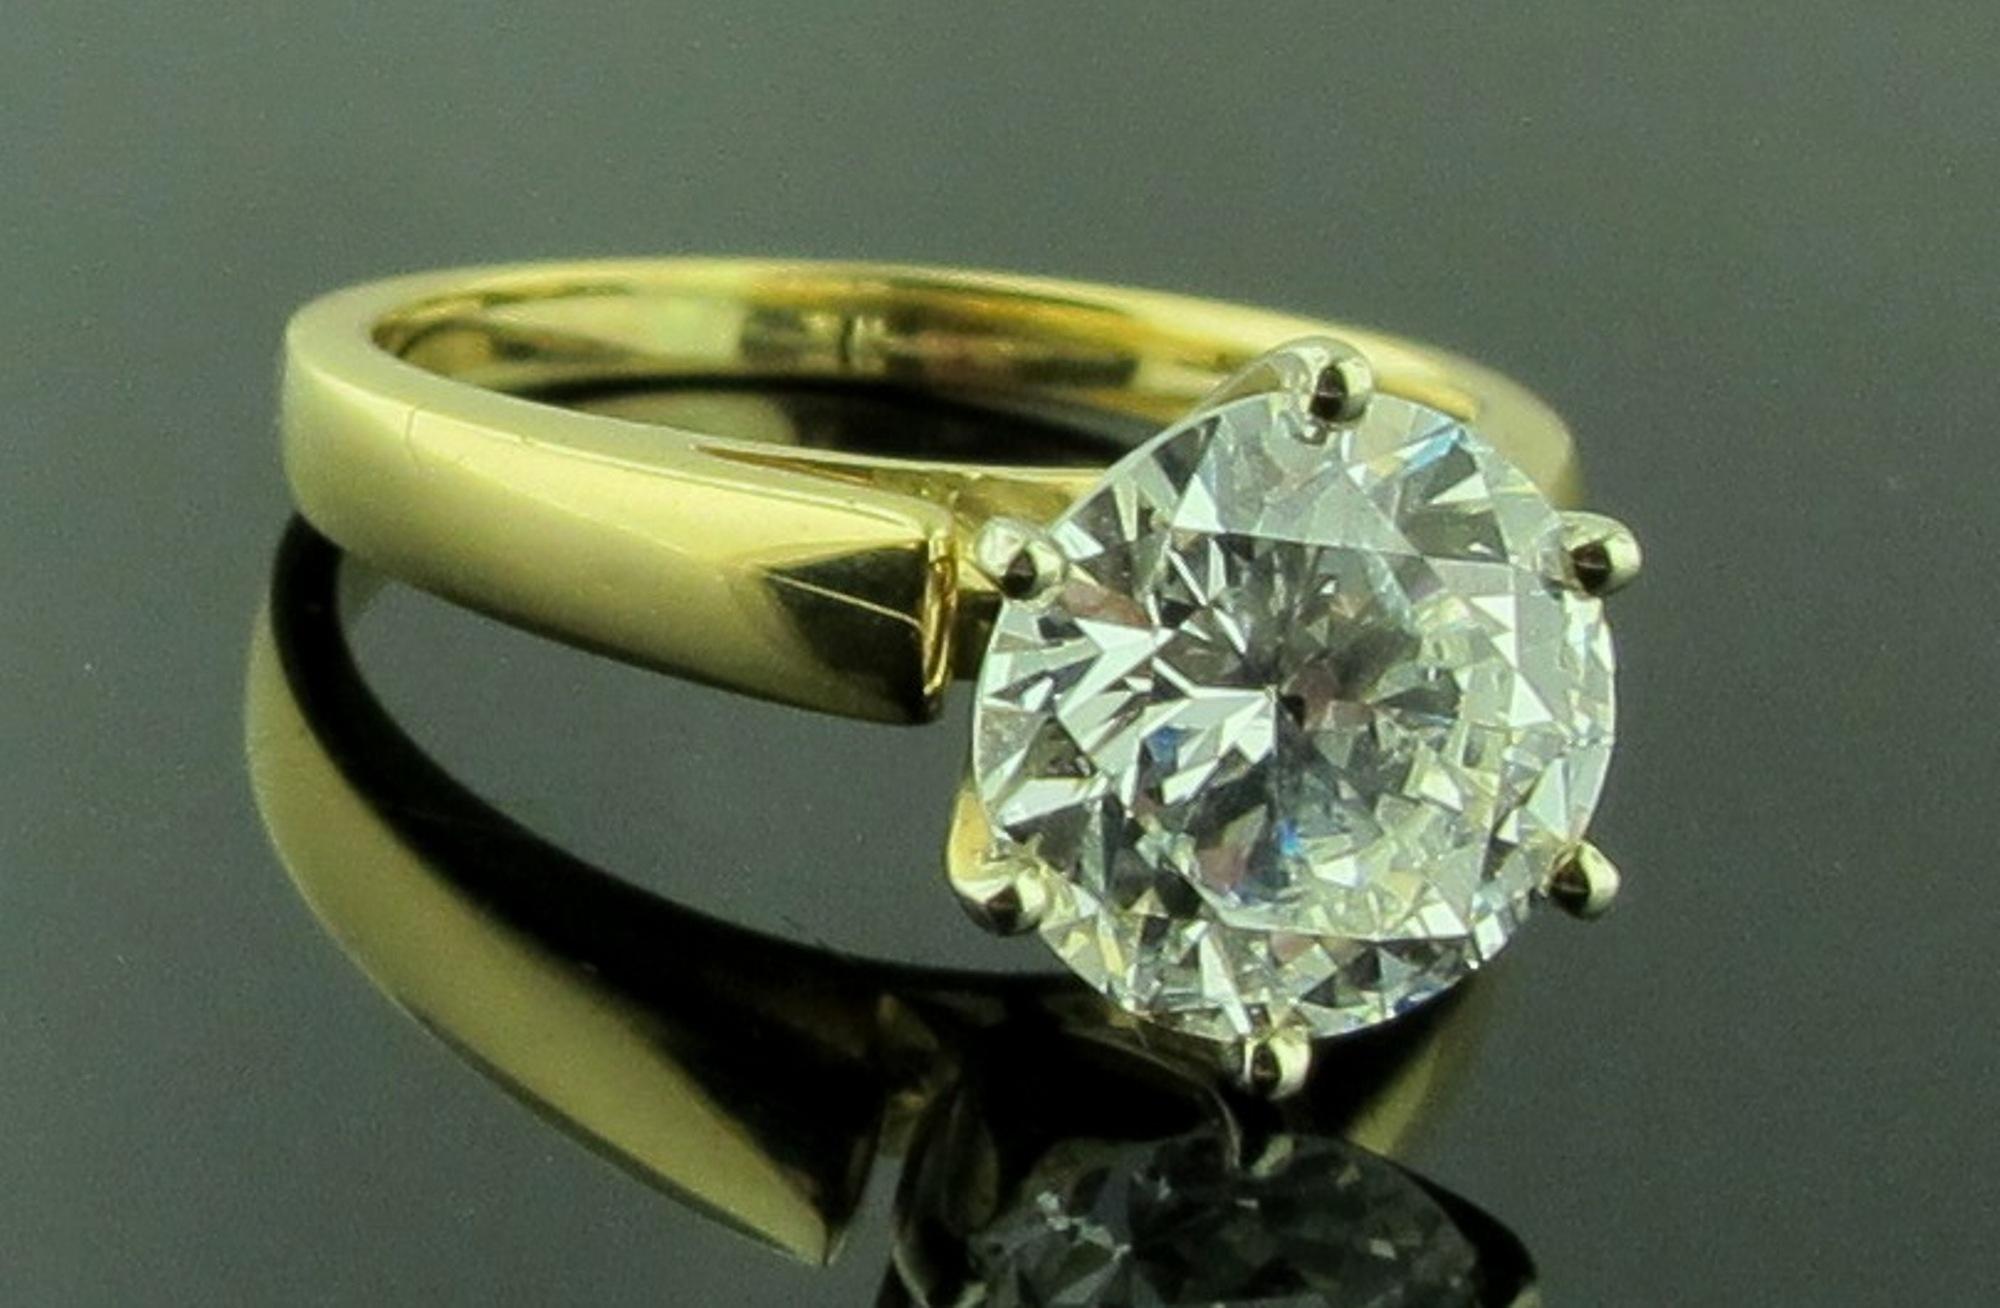 Set in 14 karat yellow gold is a 2.53 carat Round Brilliant Cut diamond solitaire.  J Color, SI-2 Clarity.  Ring size is 6.